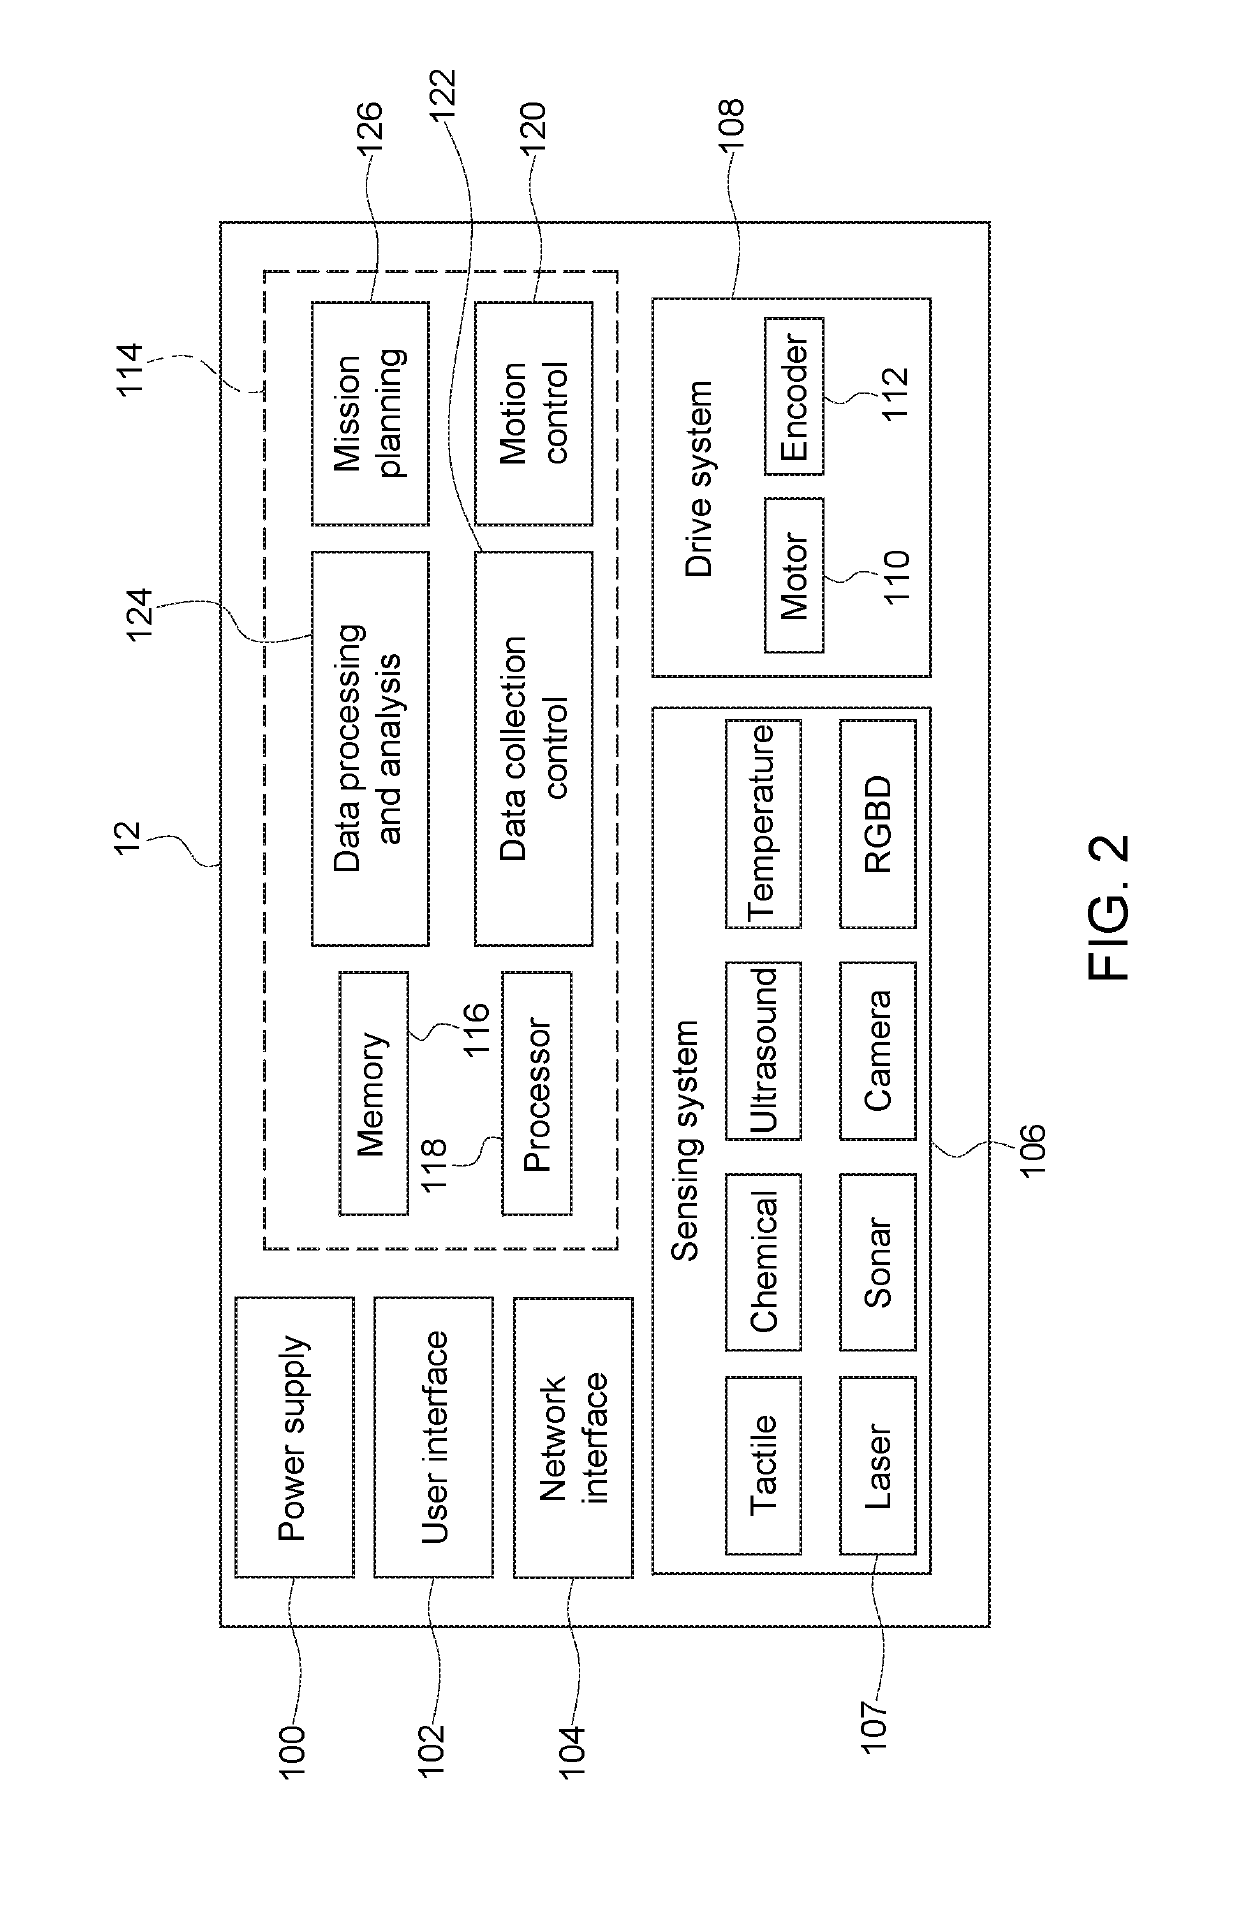 Systems and method for robotic industrial inspection system